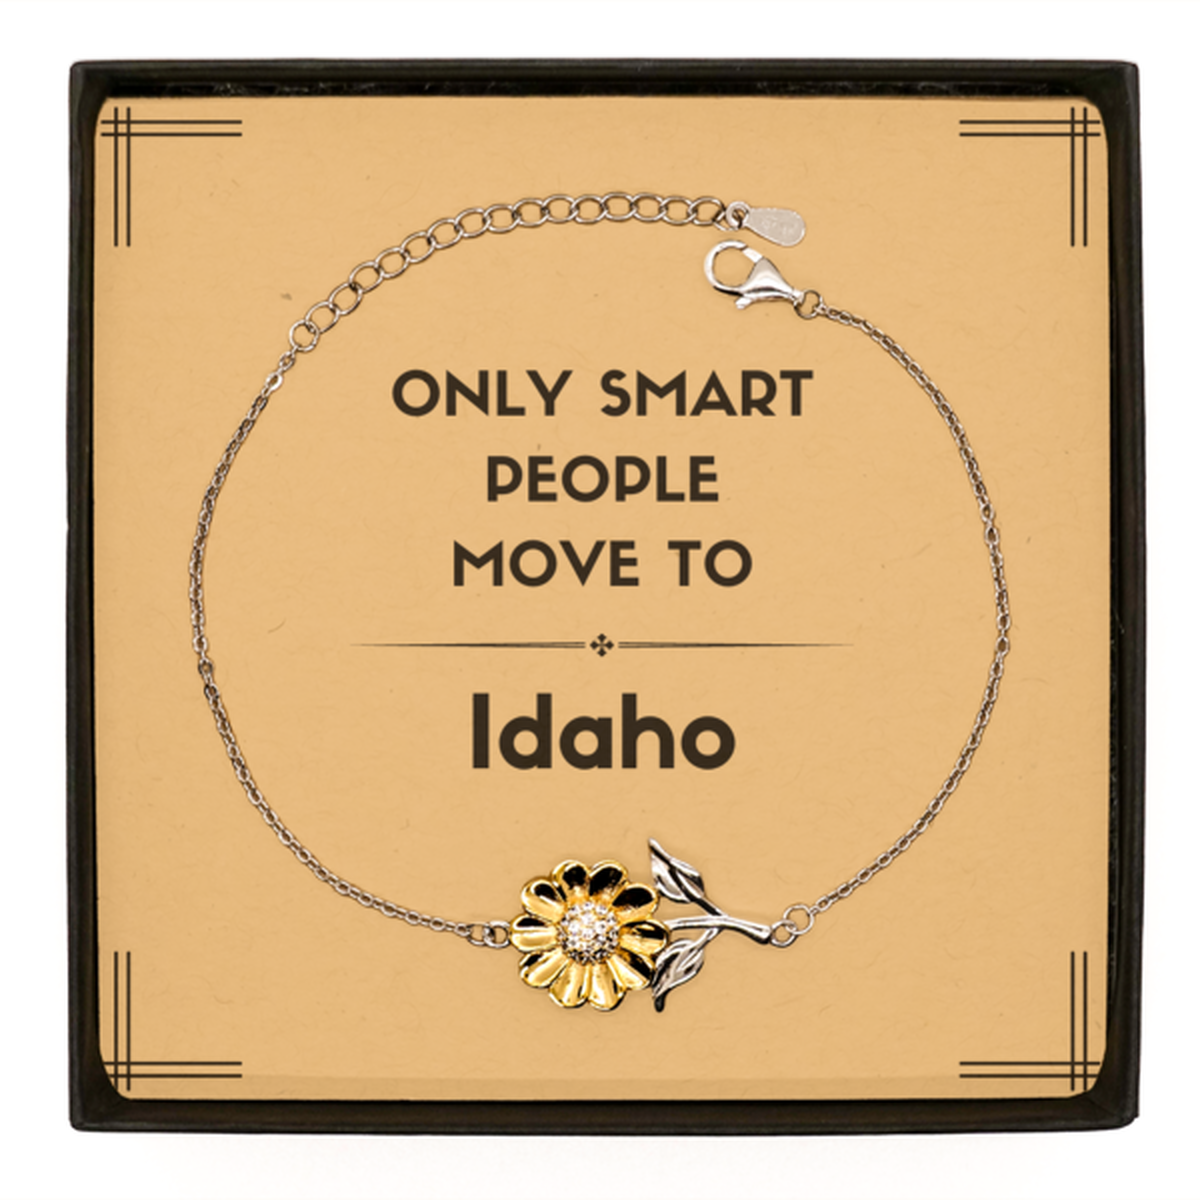 Only smart people move to Idaho Sunflower Bracelet, Message Card Gifts For Idaho, Move to Idaho Gifts for Friends Coworker Funny Saying Quote